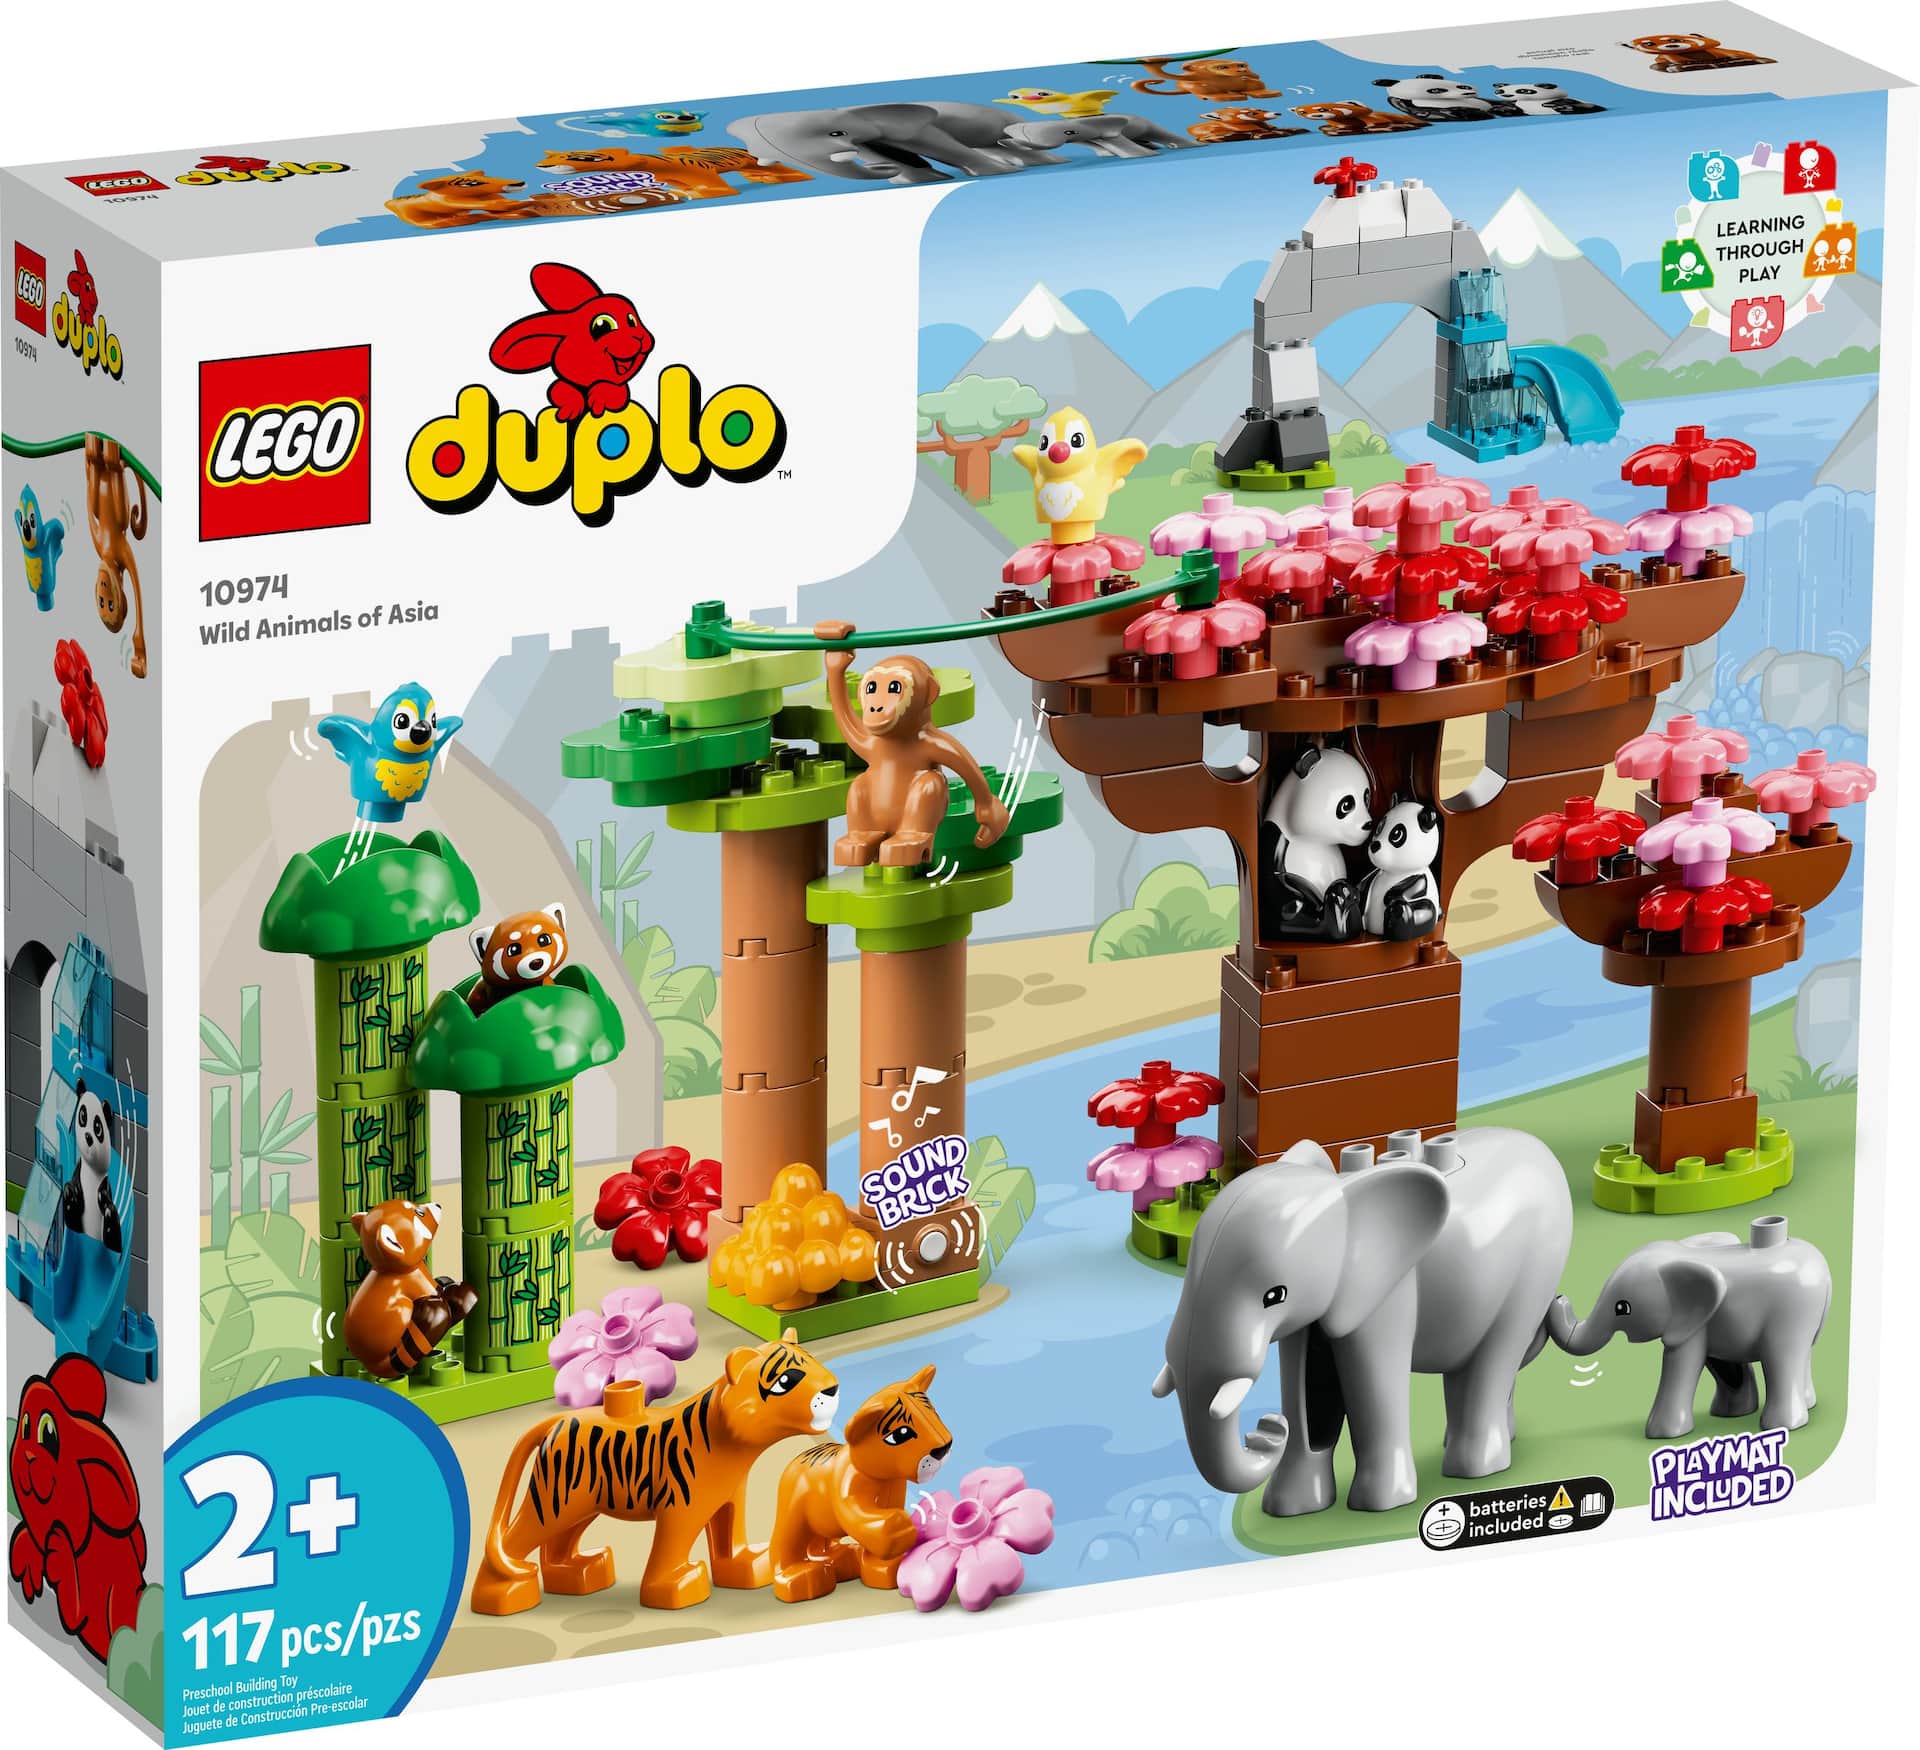 LEGO® DUPLO® Wild Animals of Asia - 10974, Ages 2+ | Canadian Tire